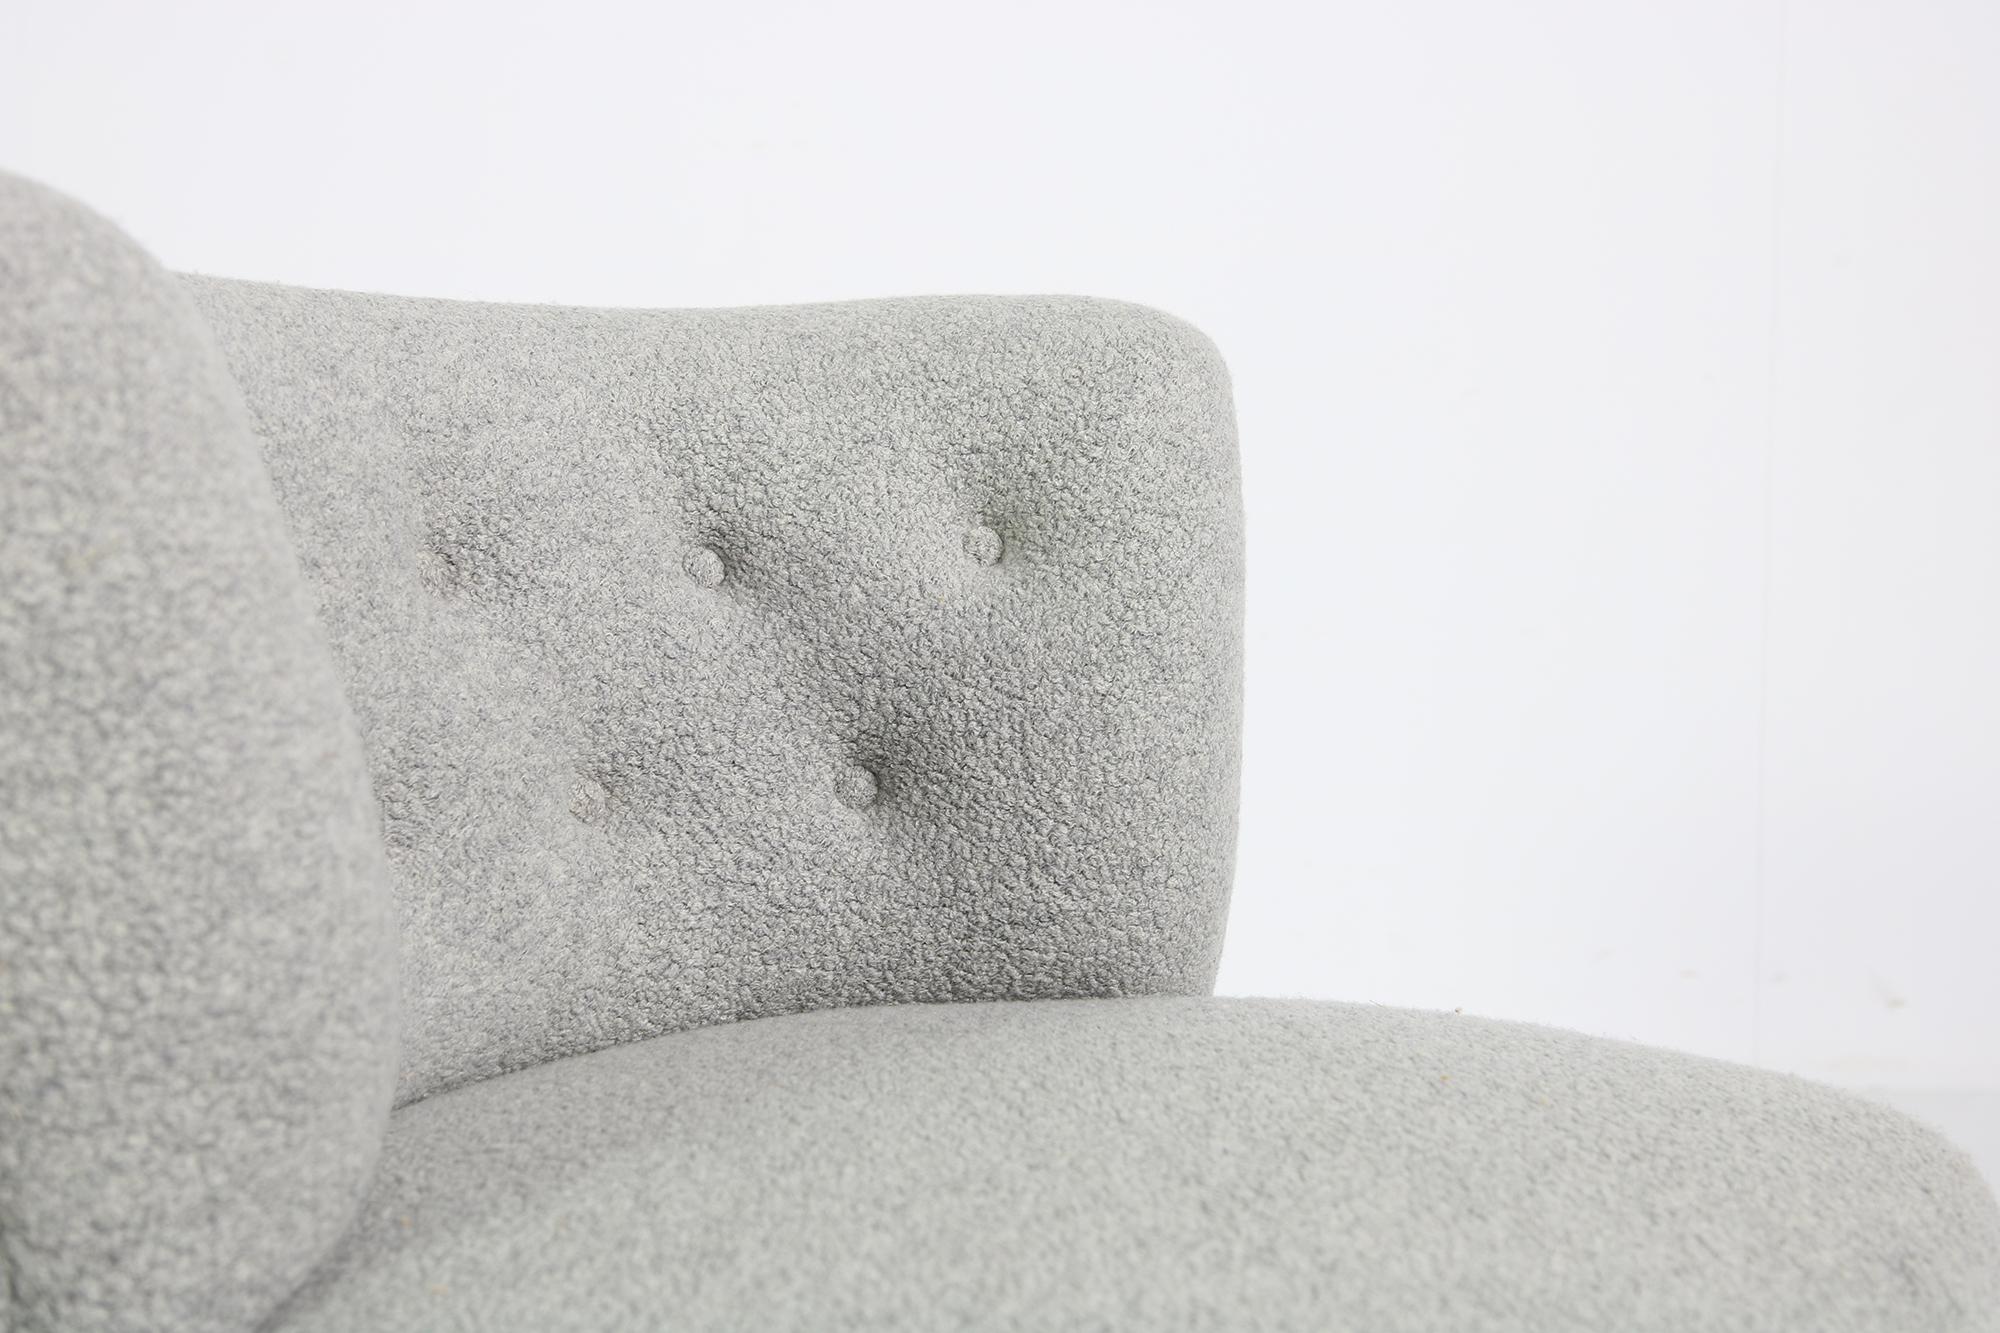 Pair of Curved Mid-Century Lounge Clam Chairs, Sweden 1950s, Boucle Fur, grey (Mitte des 20. Jahrhunderts)